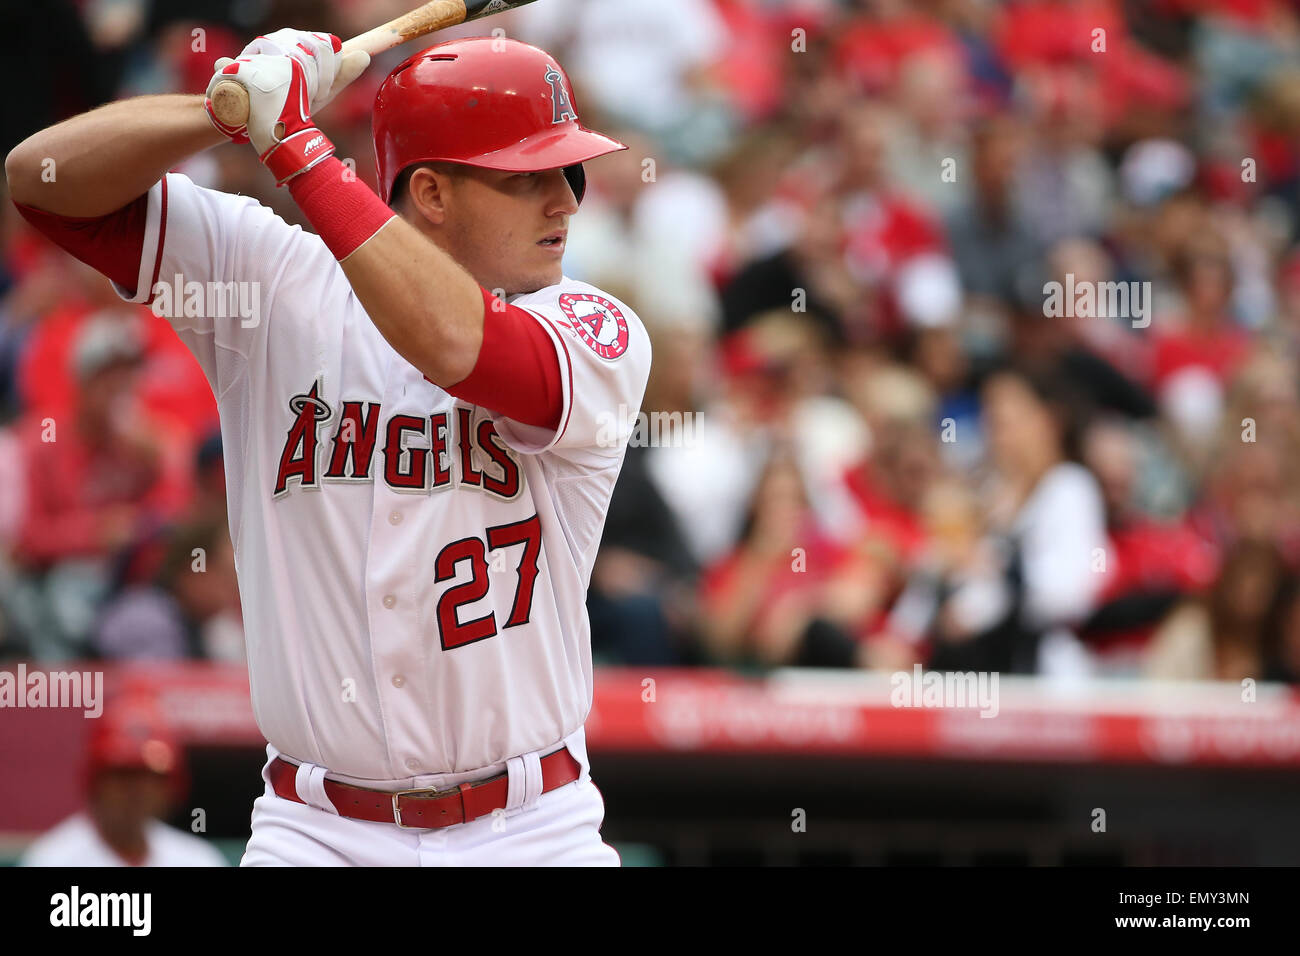 April 23, 2015: Los Angeles Angels center fielder Mike Trout #27 went 0-3  at the plate but did manage a walk and stolen base for the Halos Stock  Photo - Alamy